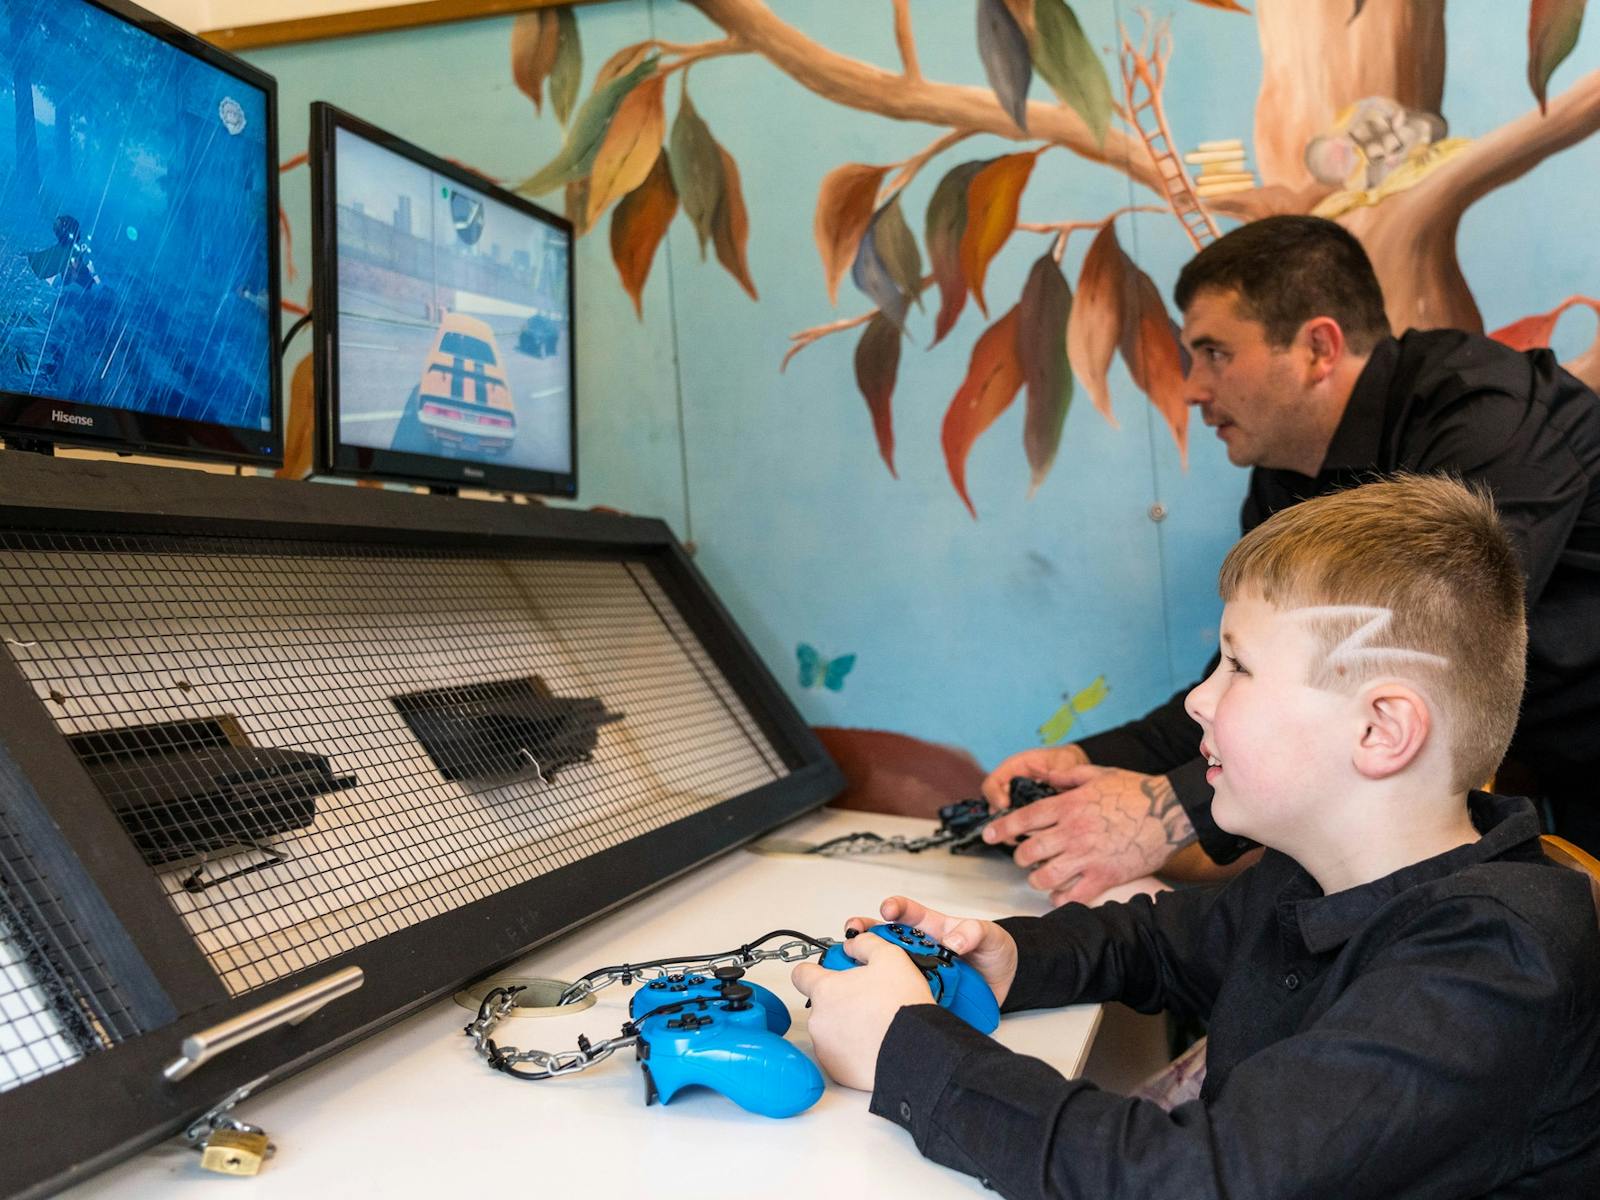 A father and children play on our PlayStation consoles in the Kauri Bistro's playroom